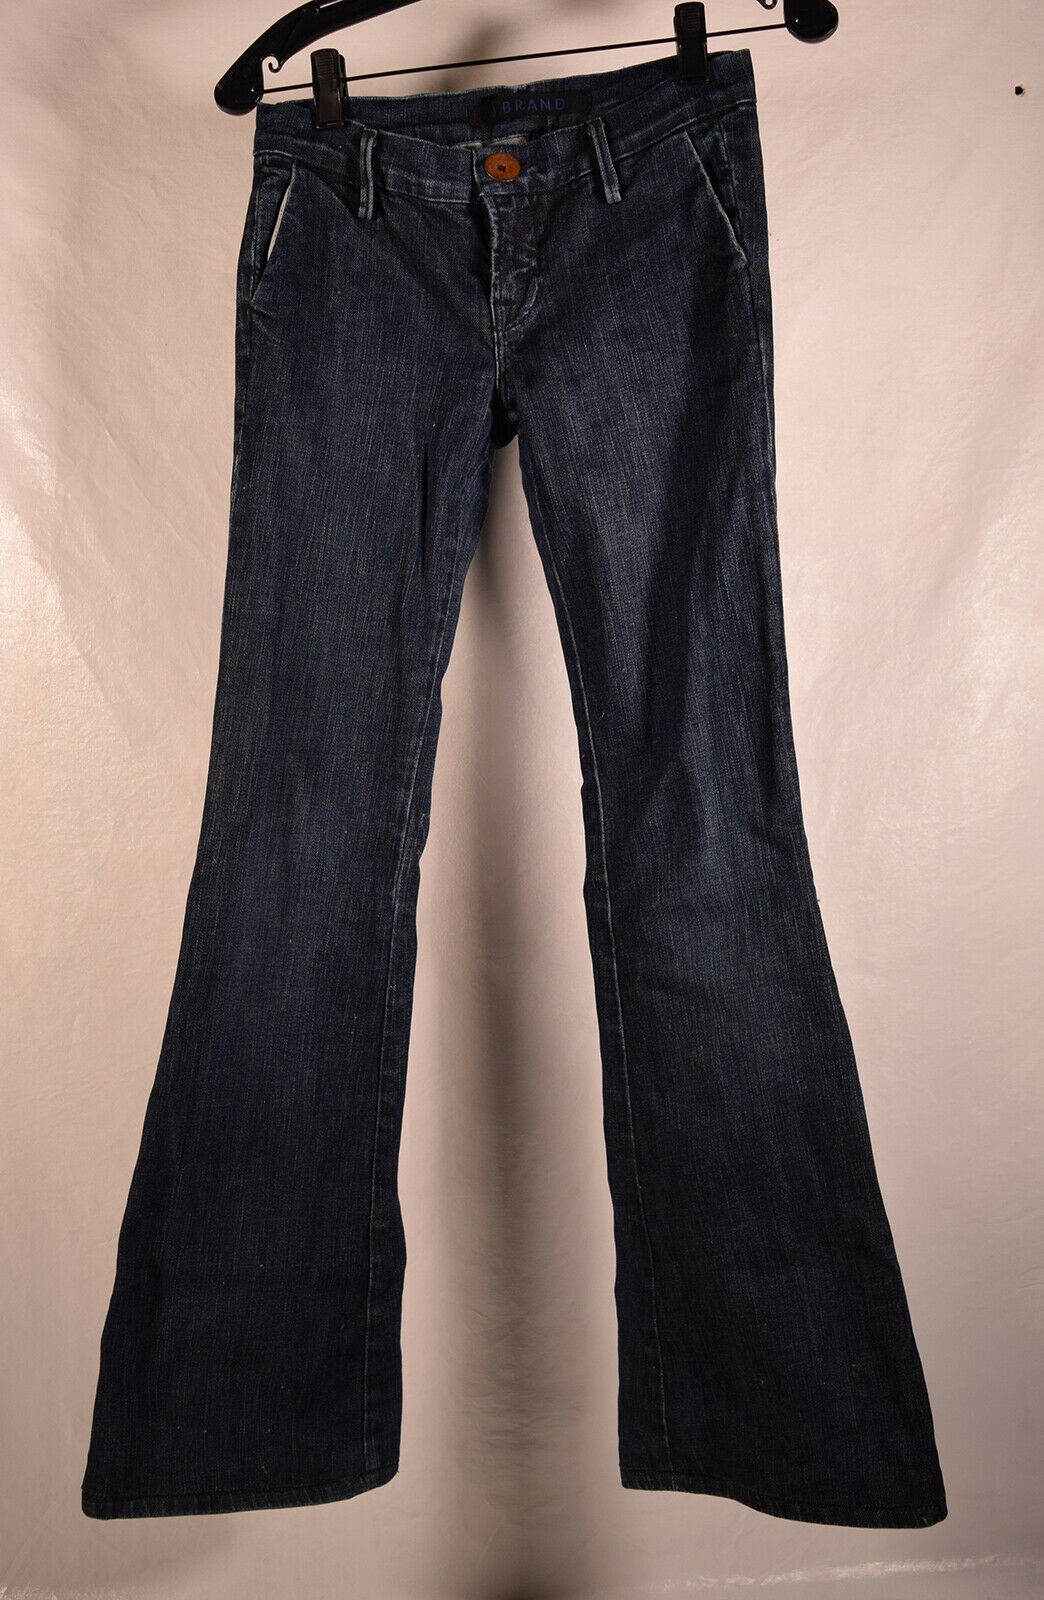 Primary image for J Brand Womens Jeans Flare Blue 742 Worn 25